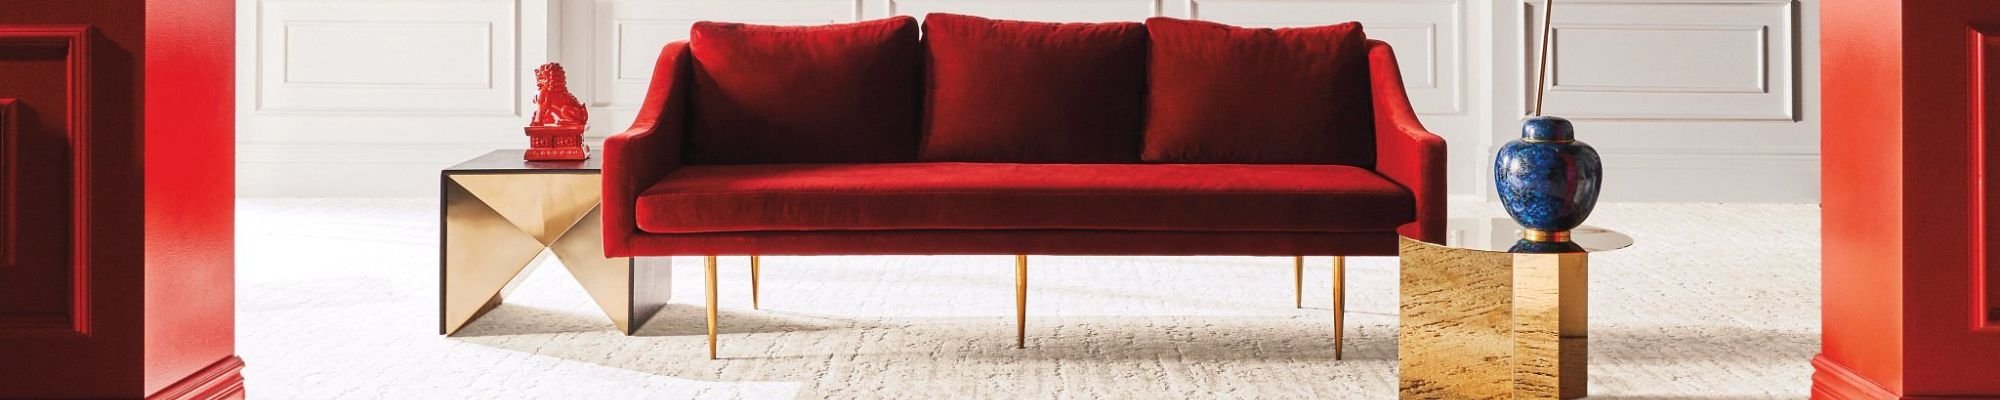 red couch on beige carpet from Carter Carpets & Vinyl in Temperance, MI